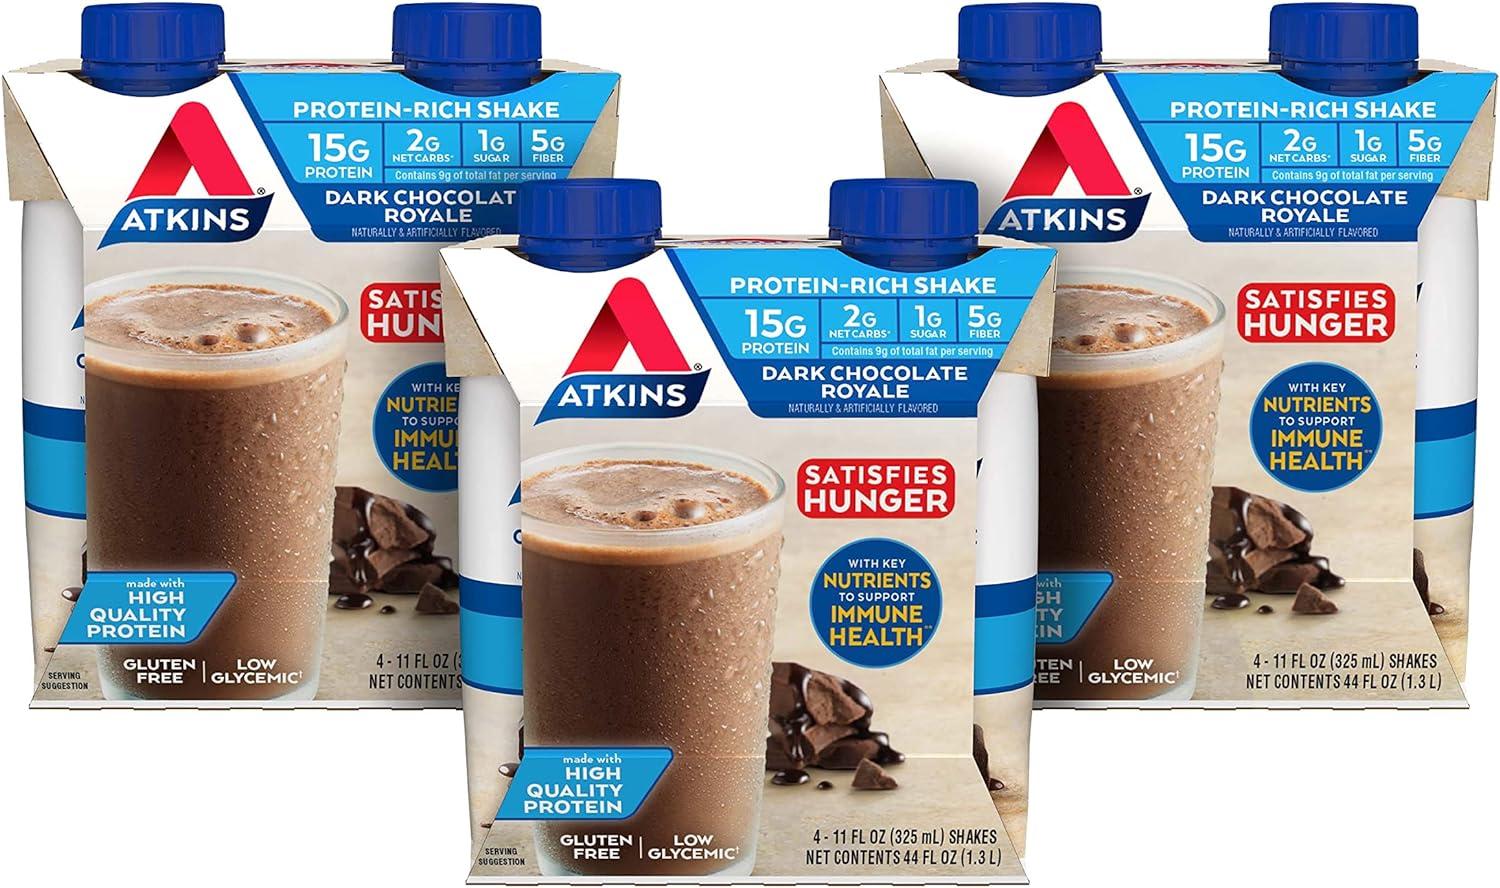 Atkins Dark Chocolate Royale Protein Shake 12 Pack for $12.79 Shipped